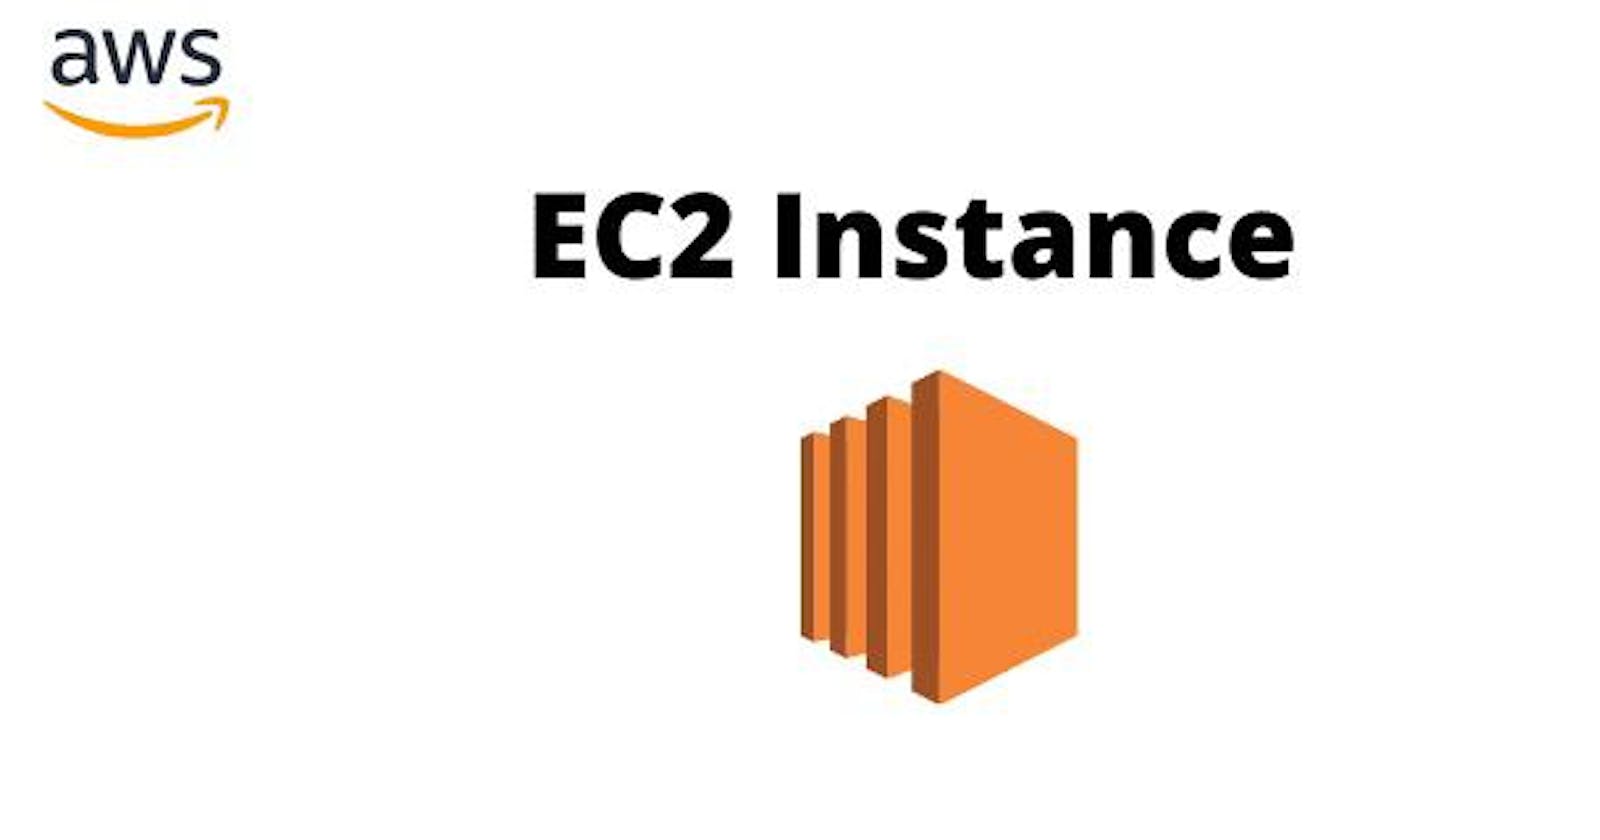 How To Create An AWS EC2 Instance: simplified step by step guide for beginners